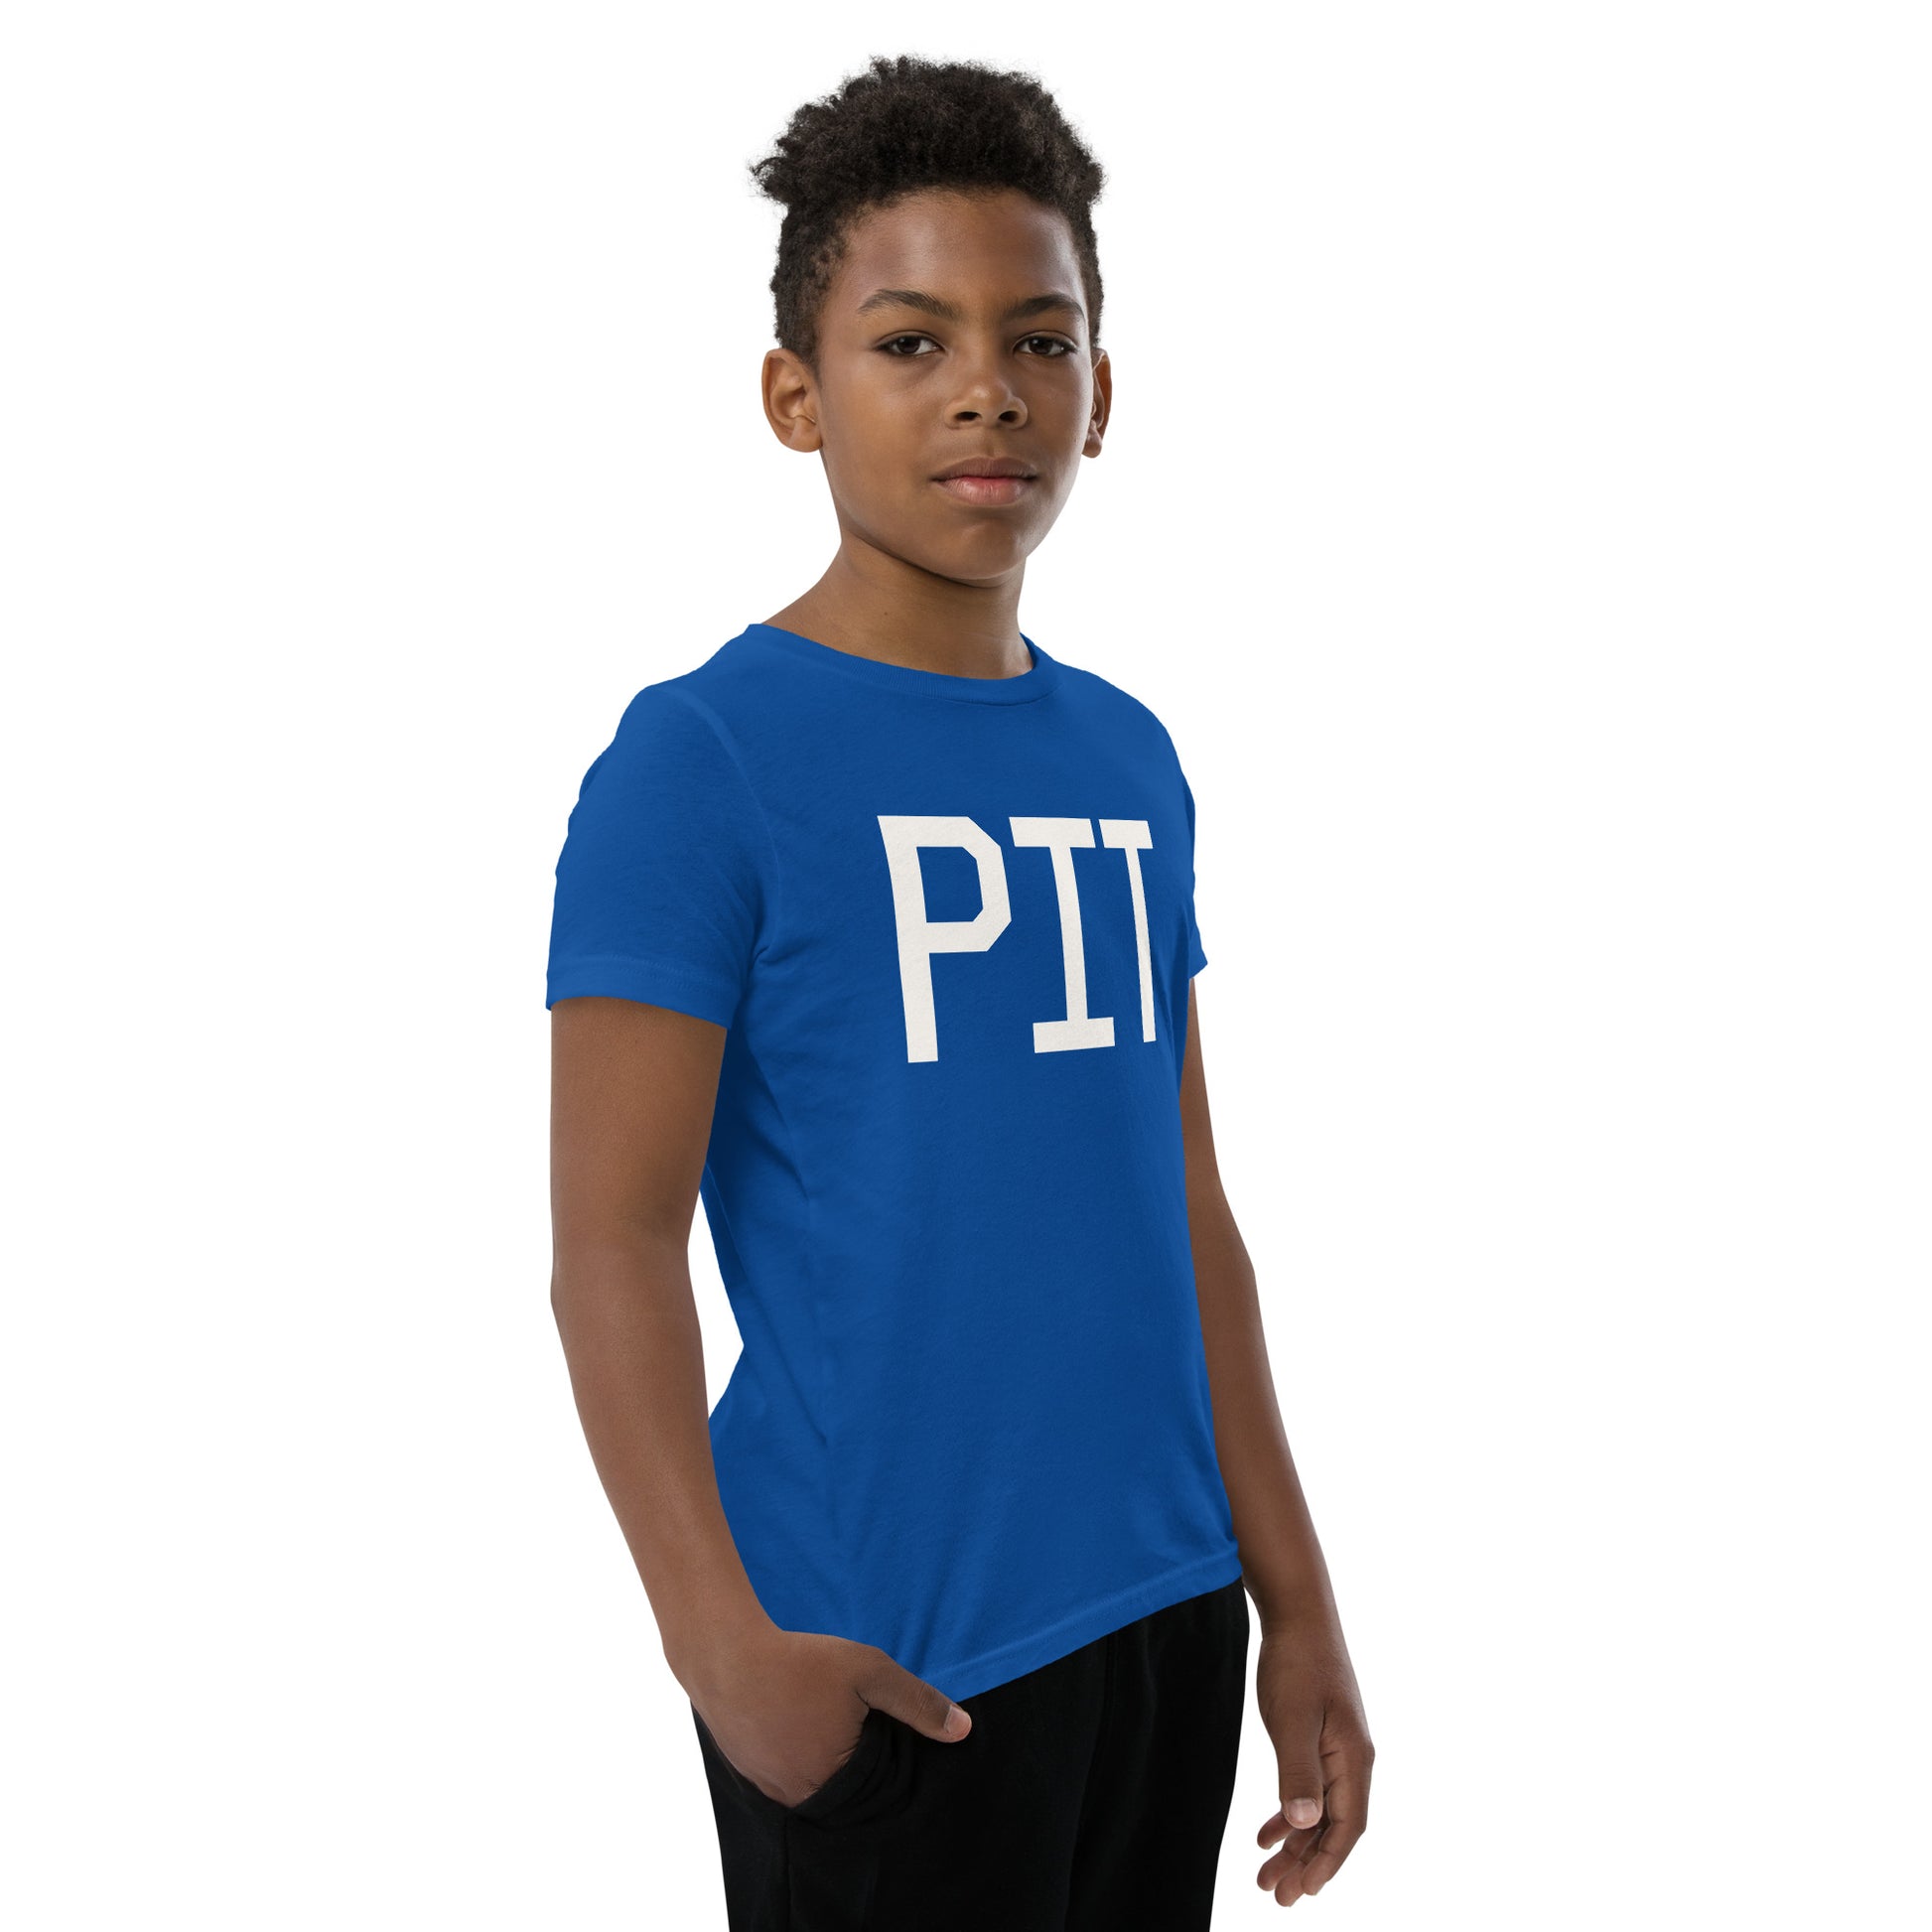 Kid's T-Shirt - White Graphic • PIT Pittsburgh • YHM Designs - Image 12